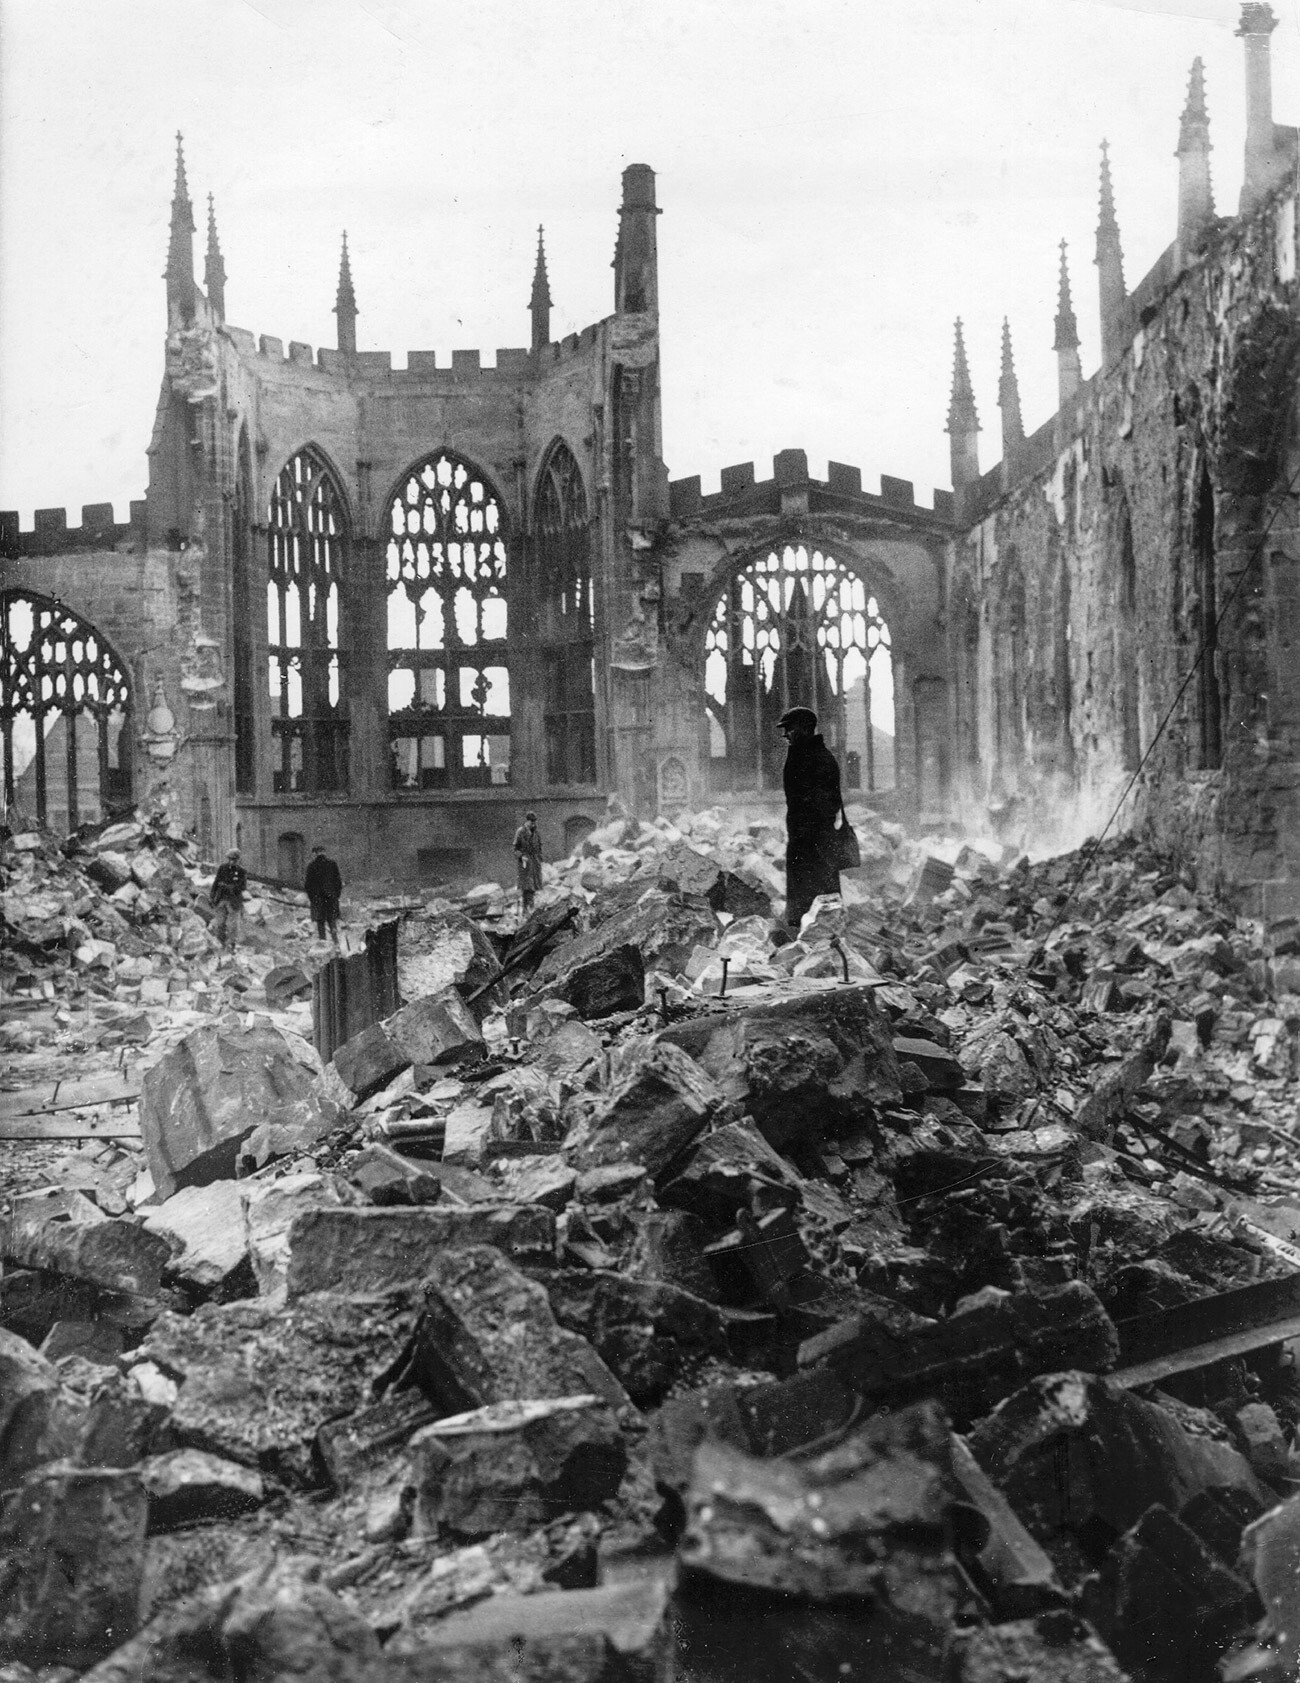 People walking in the ruins of Coventry Cathedral.